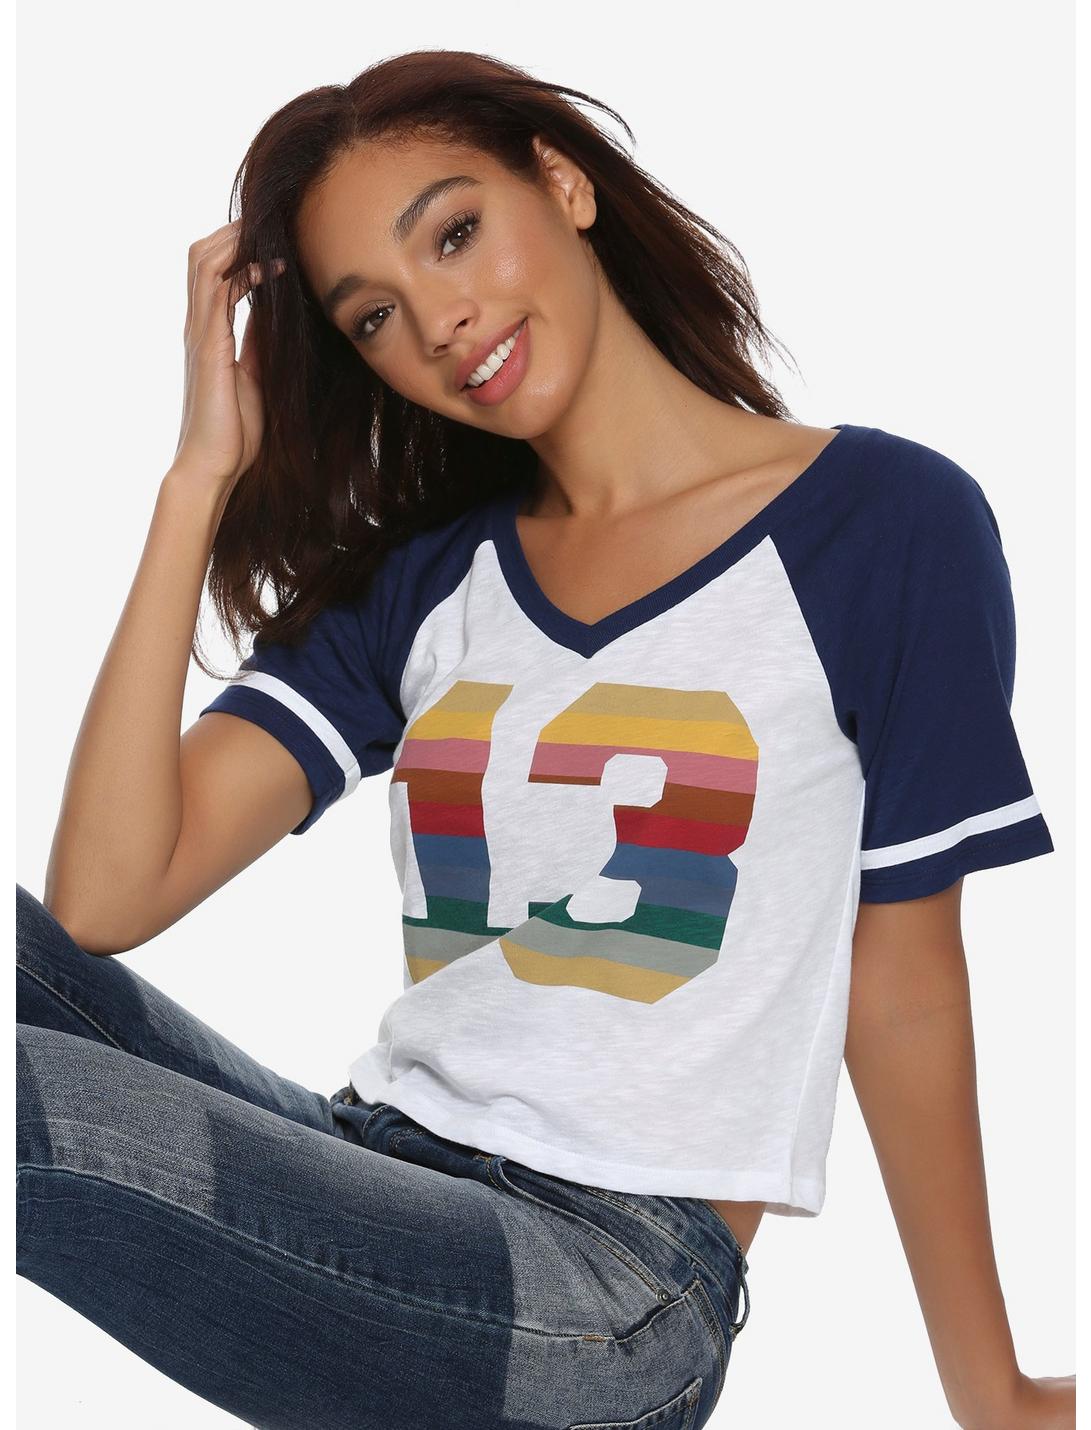 Doctor Who Thirteen Cropped Athletic T-Shirt, MULTI, hi-res